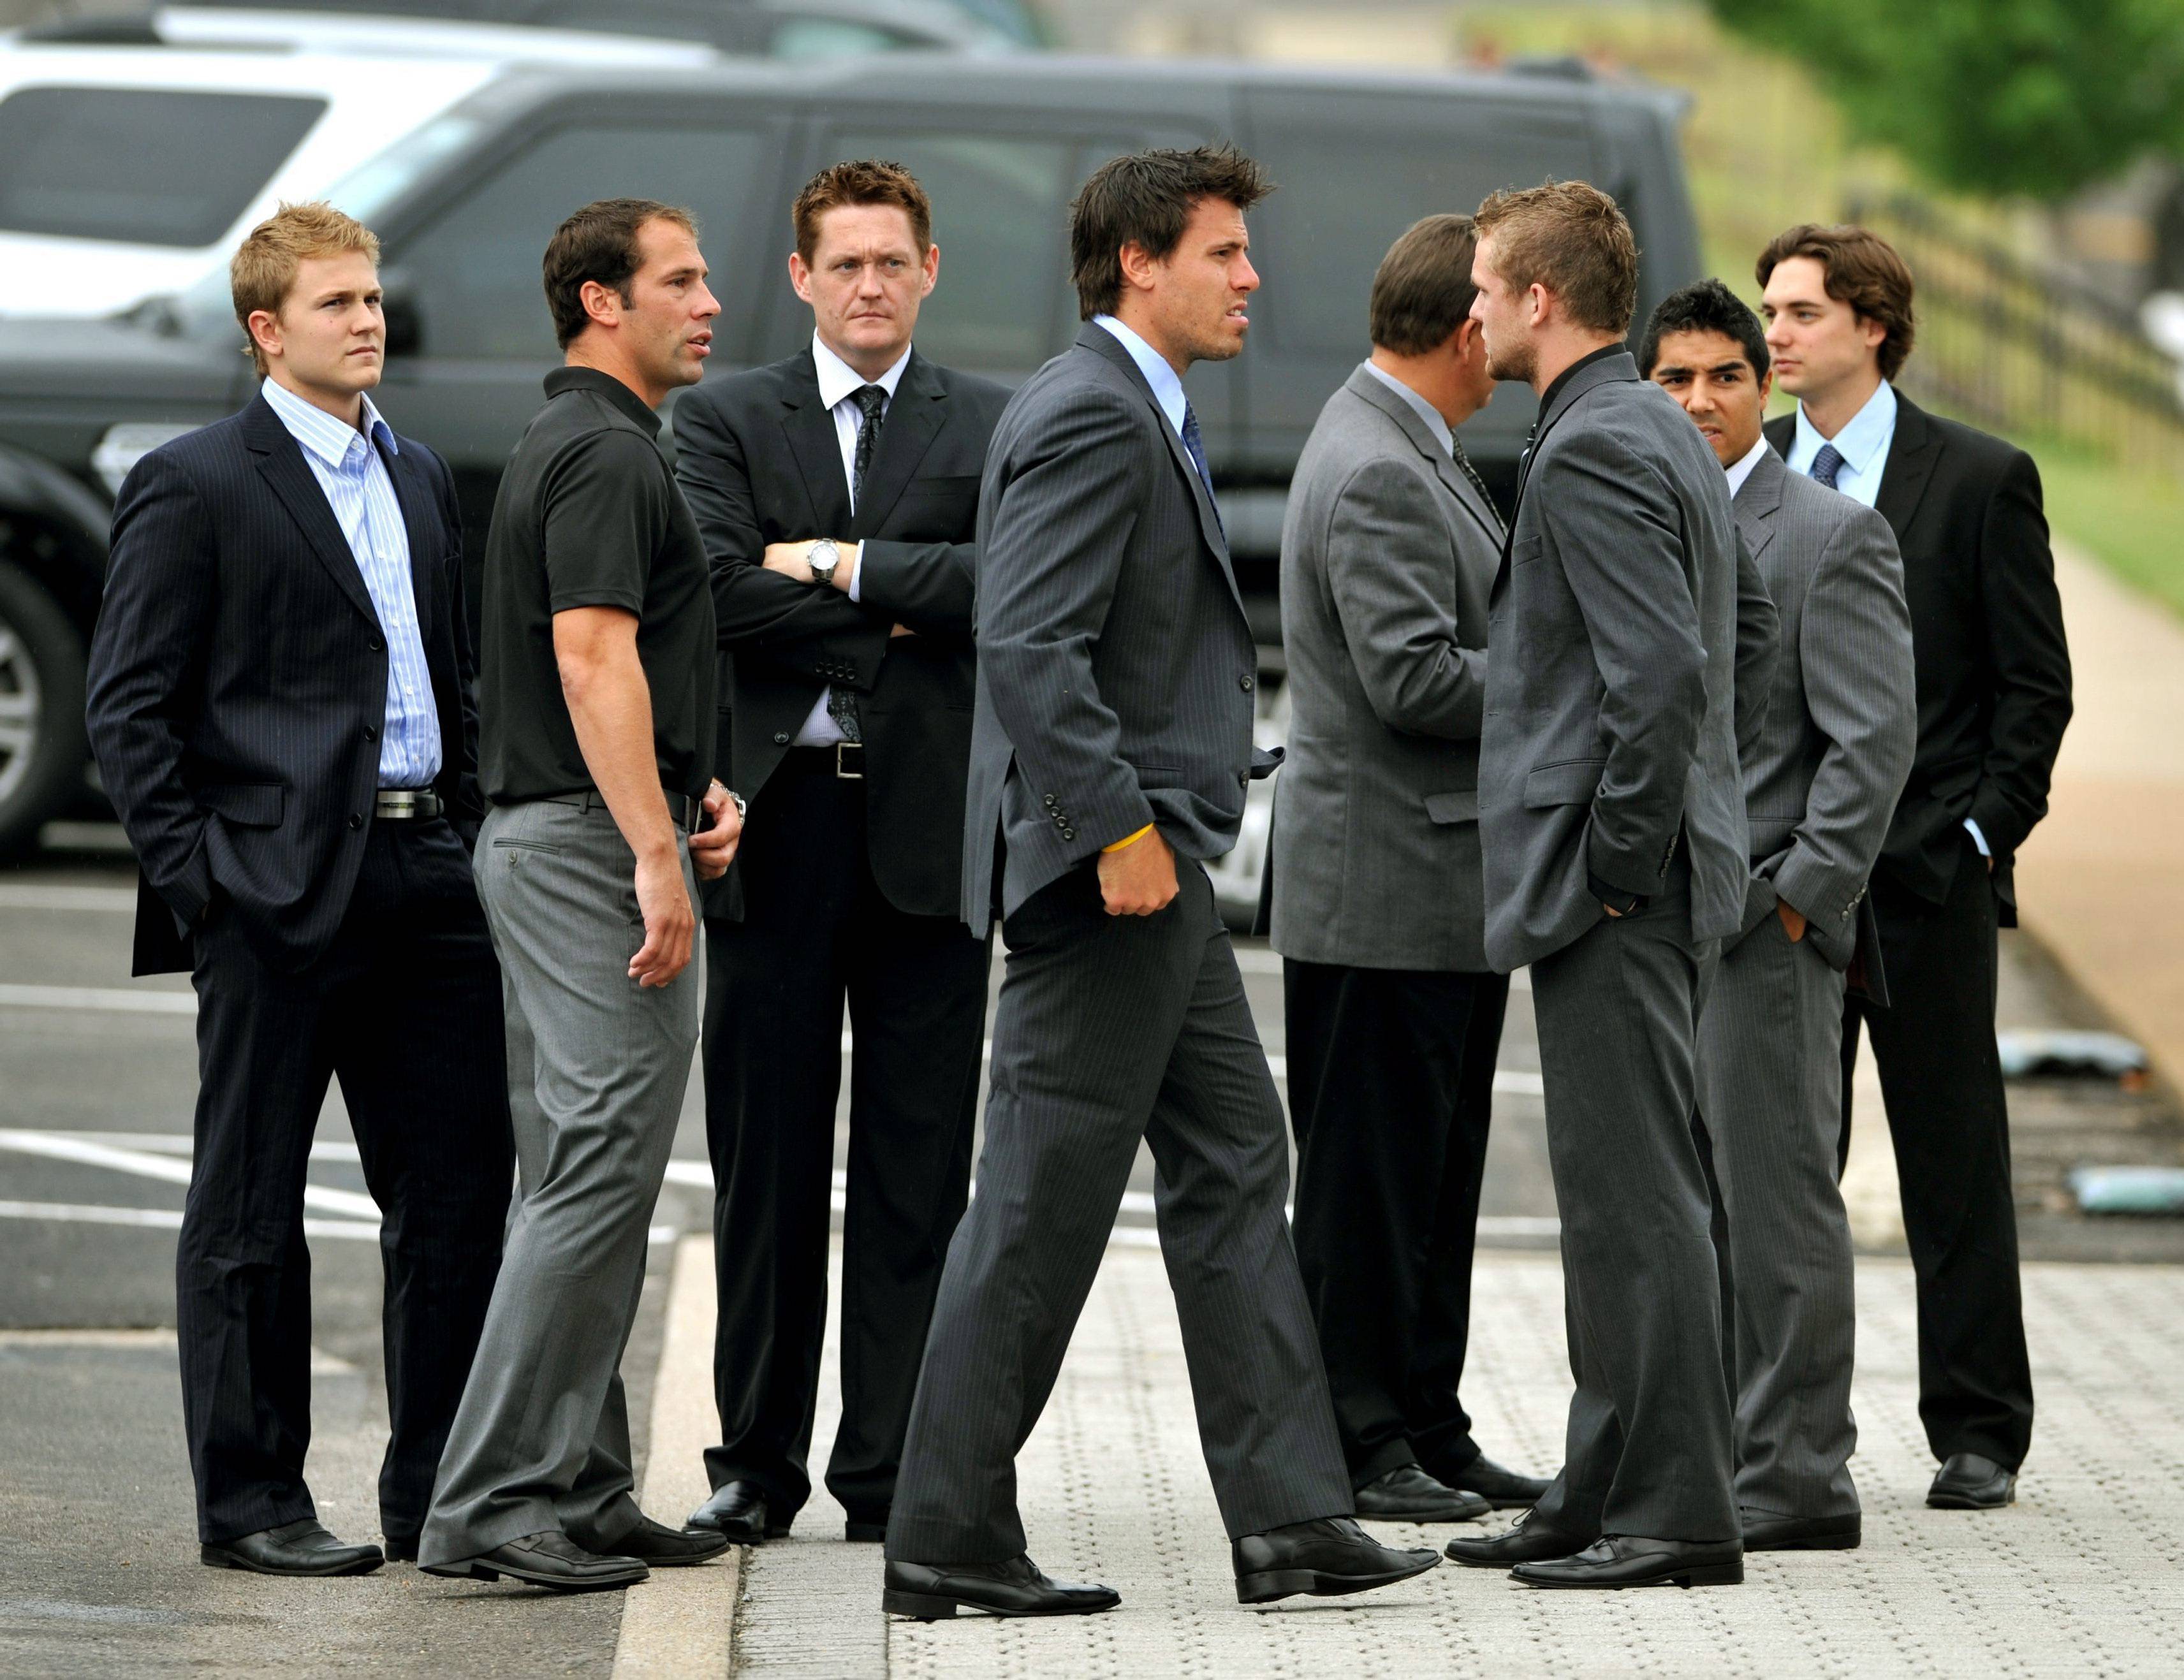 Why do hockey players wear suits? 